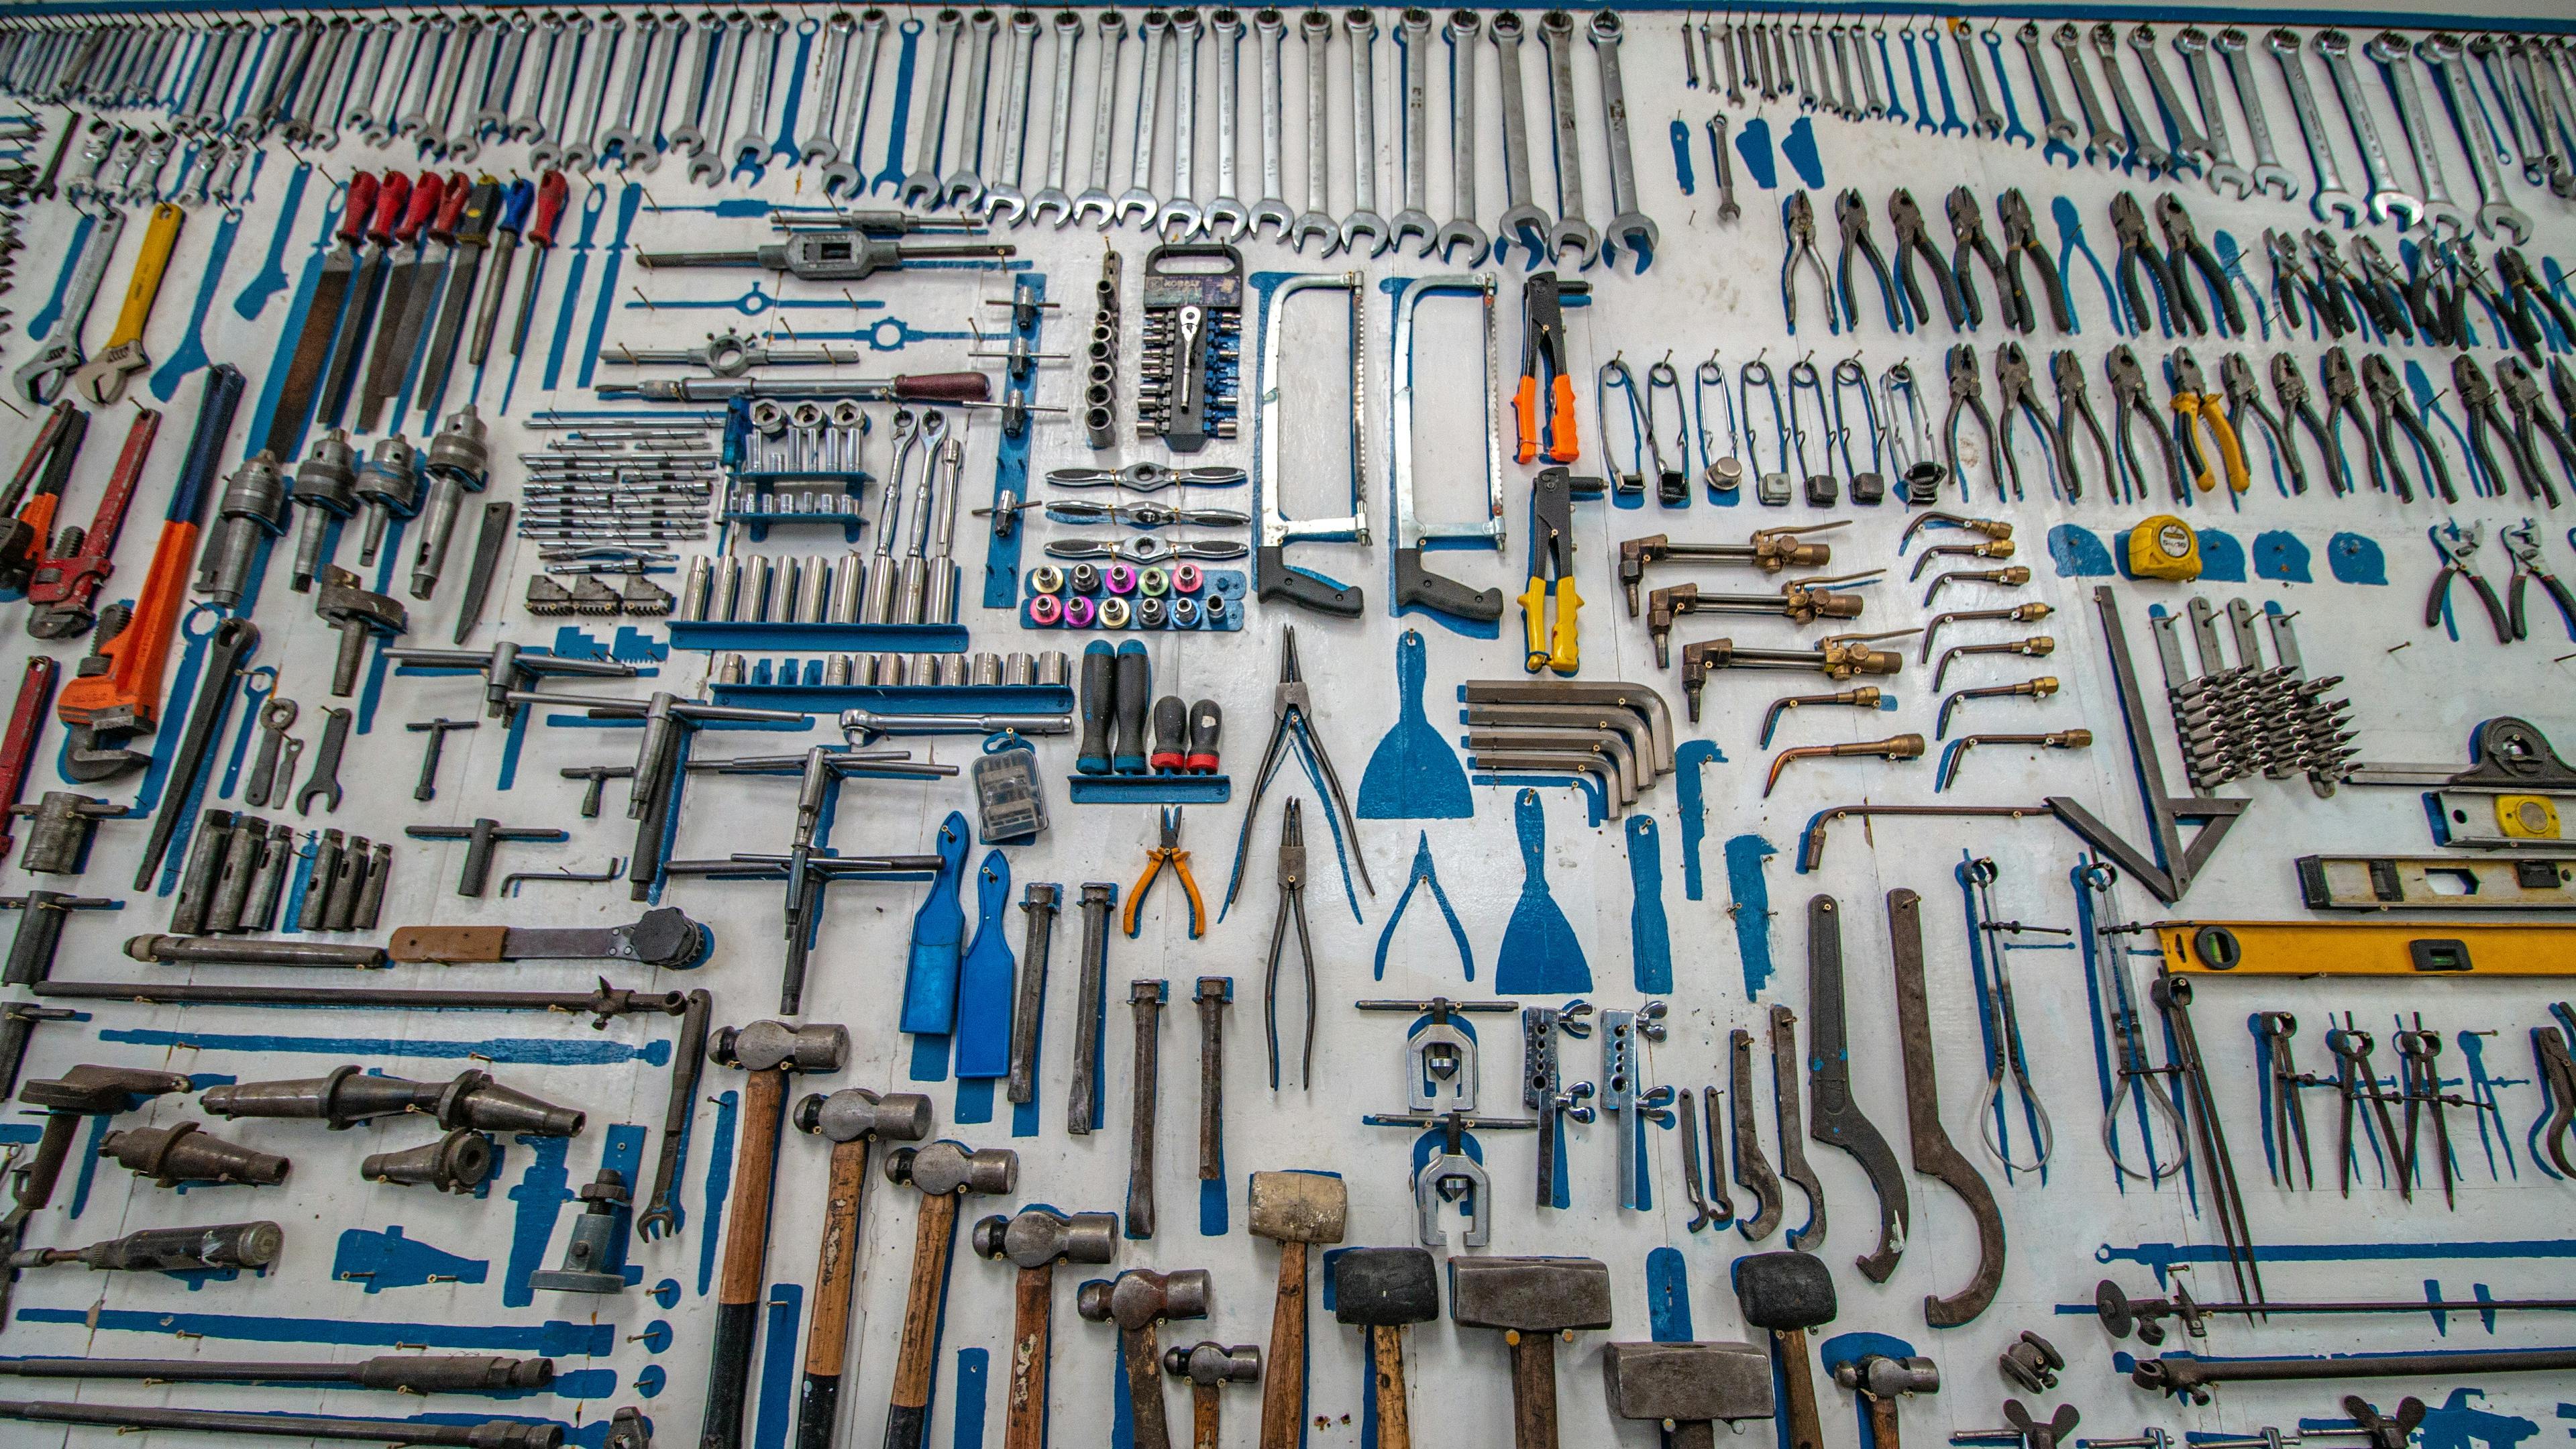 A variety of handheld tools hanging from a wall